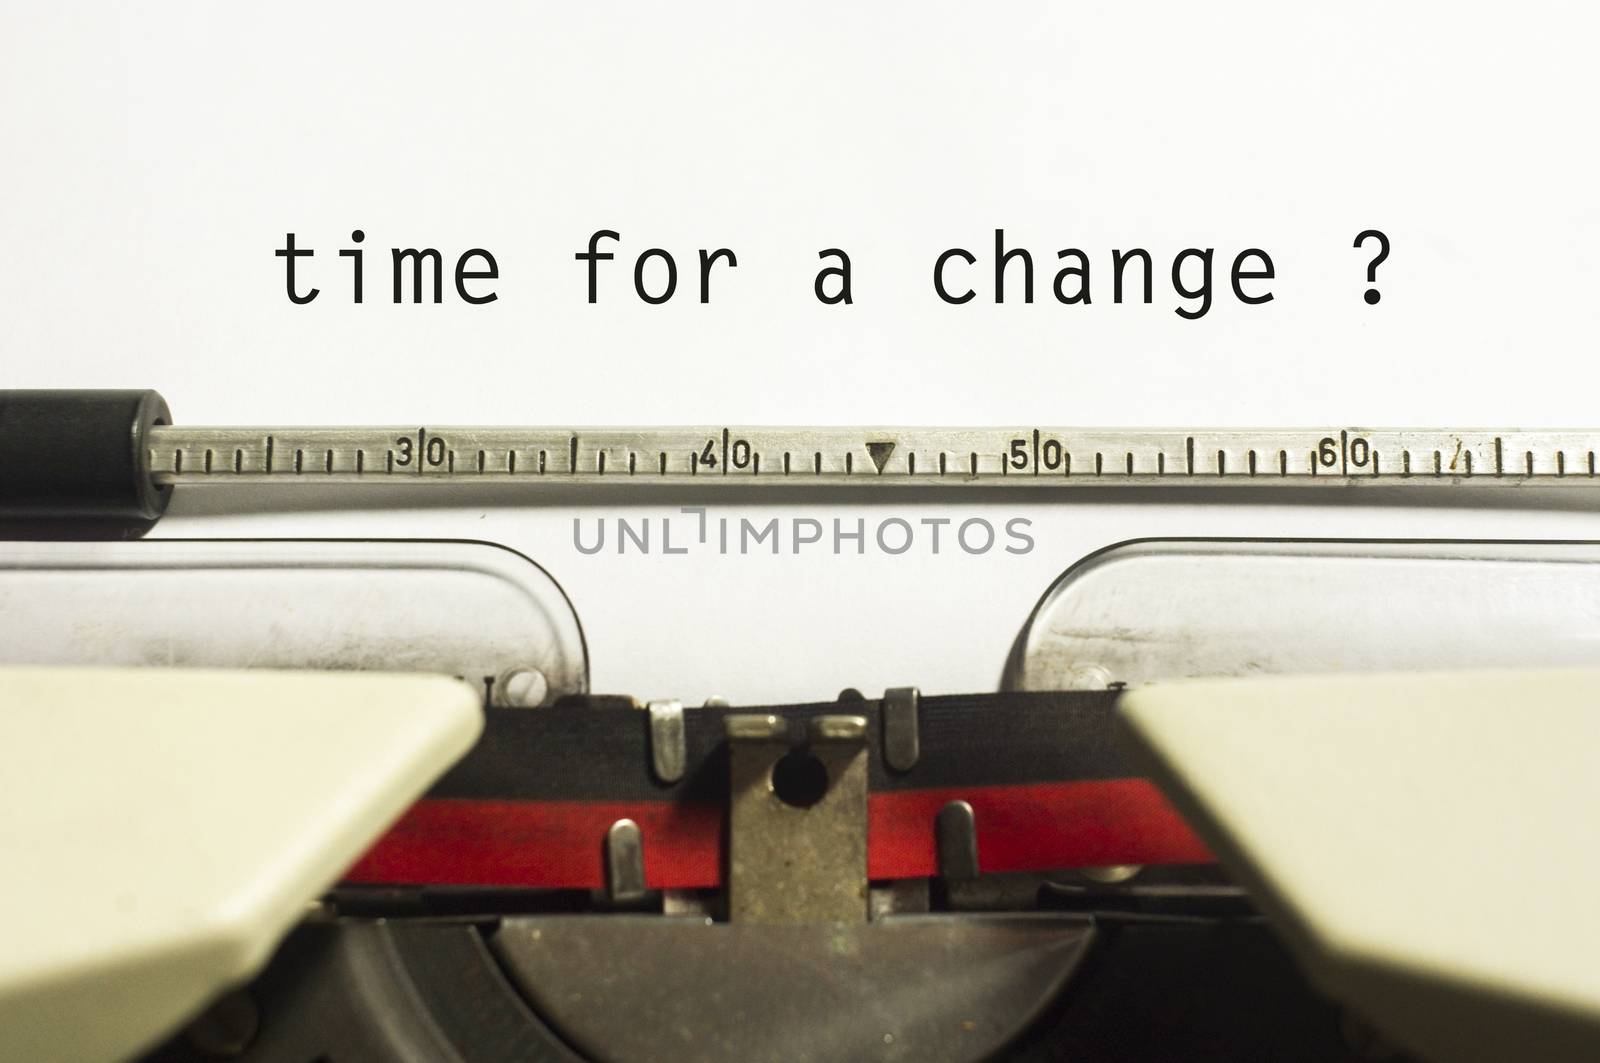 message of time for a change, for conceptual purpose.